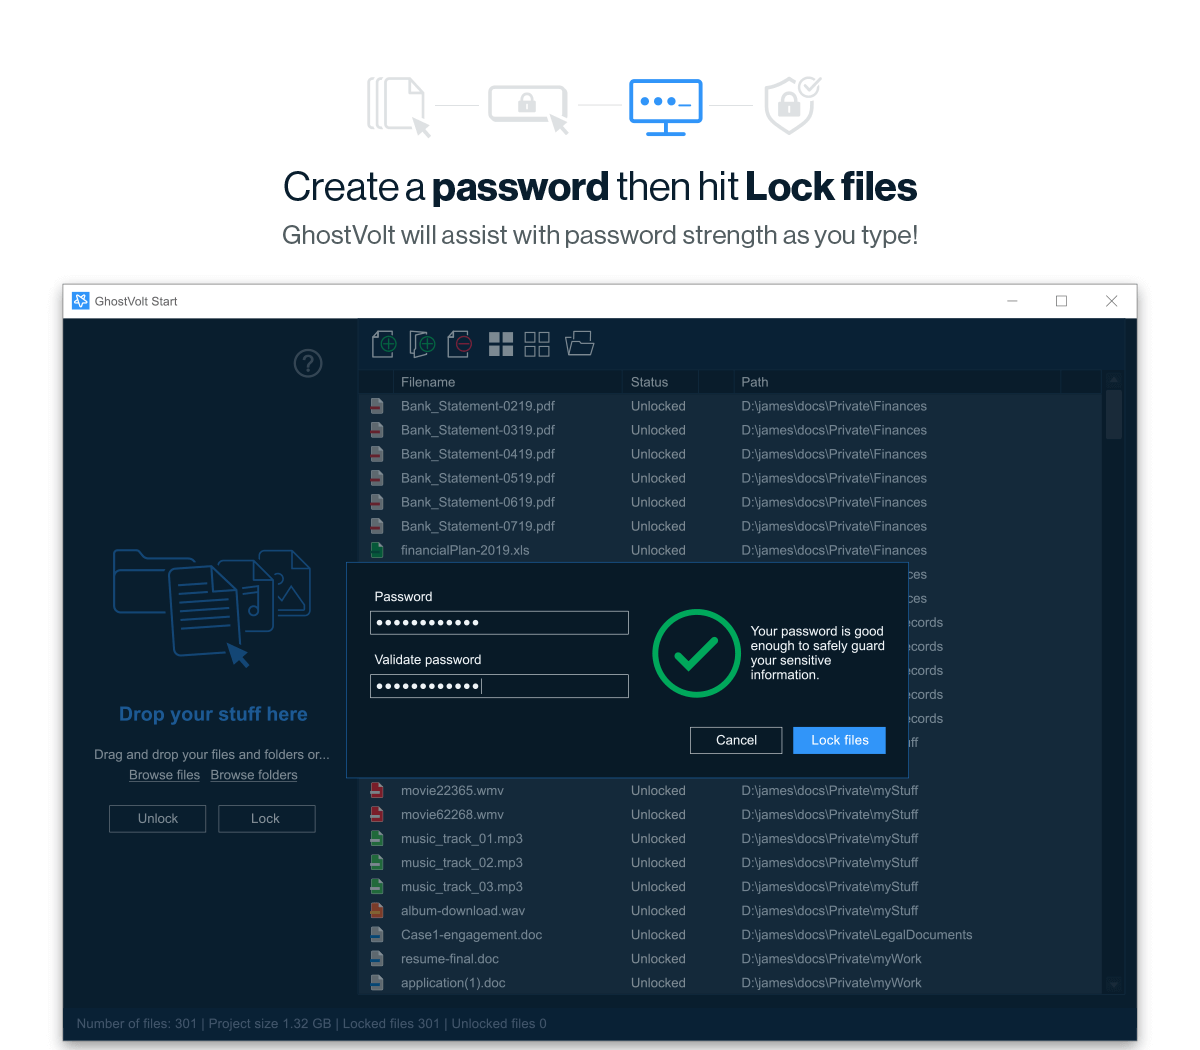 Creating a password to lock files.